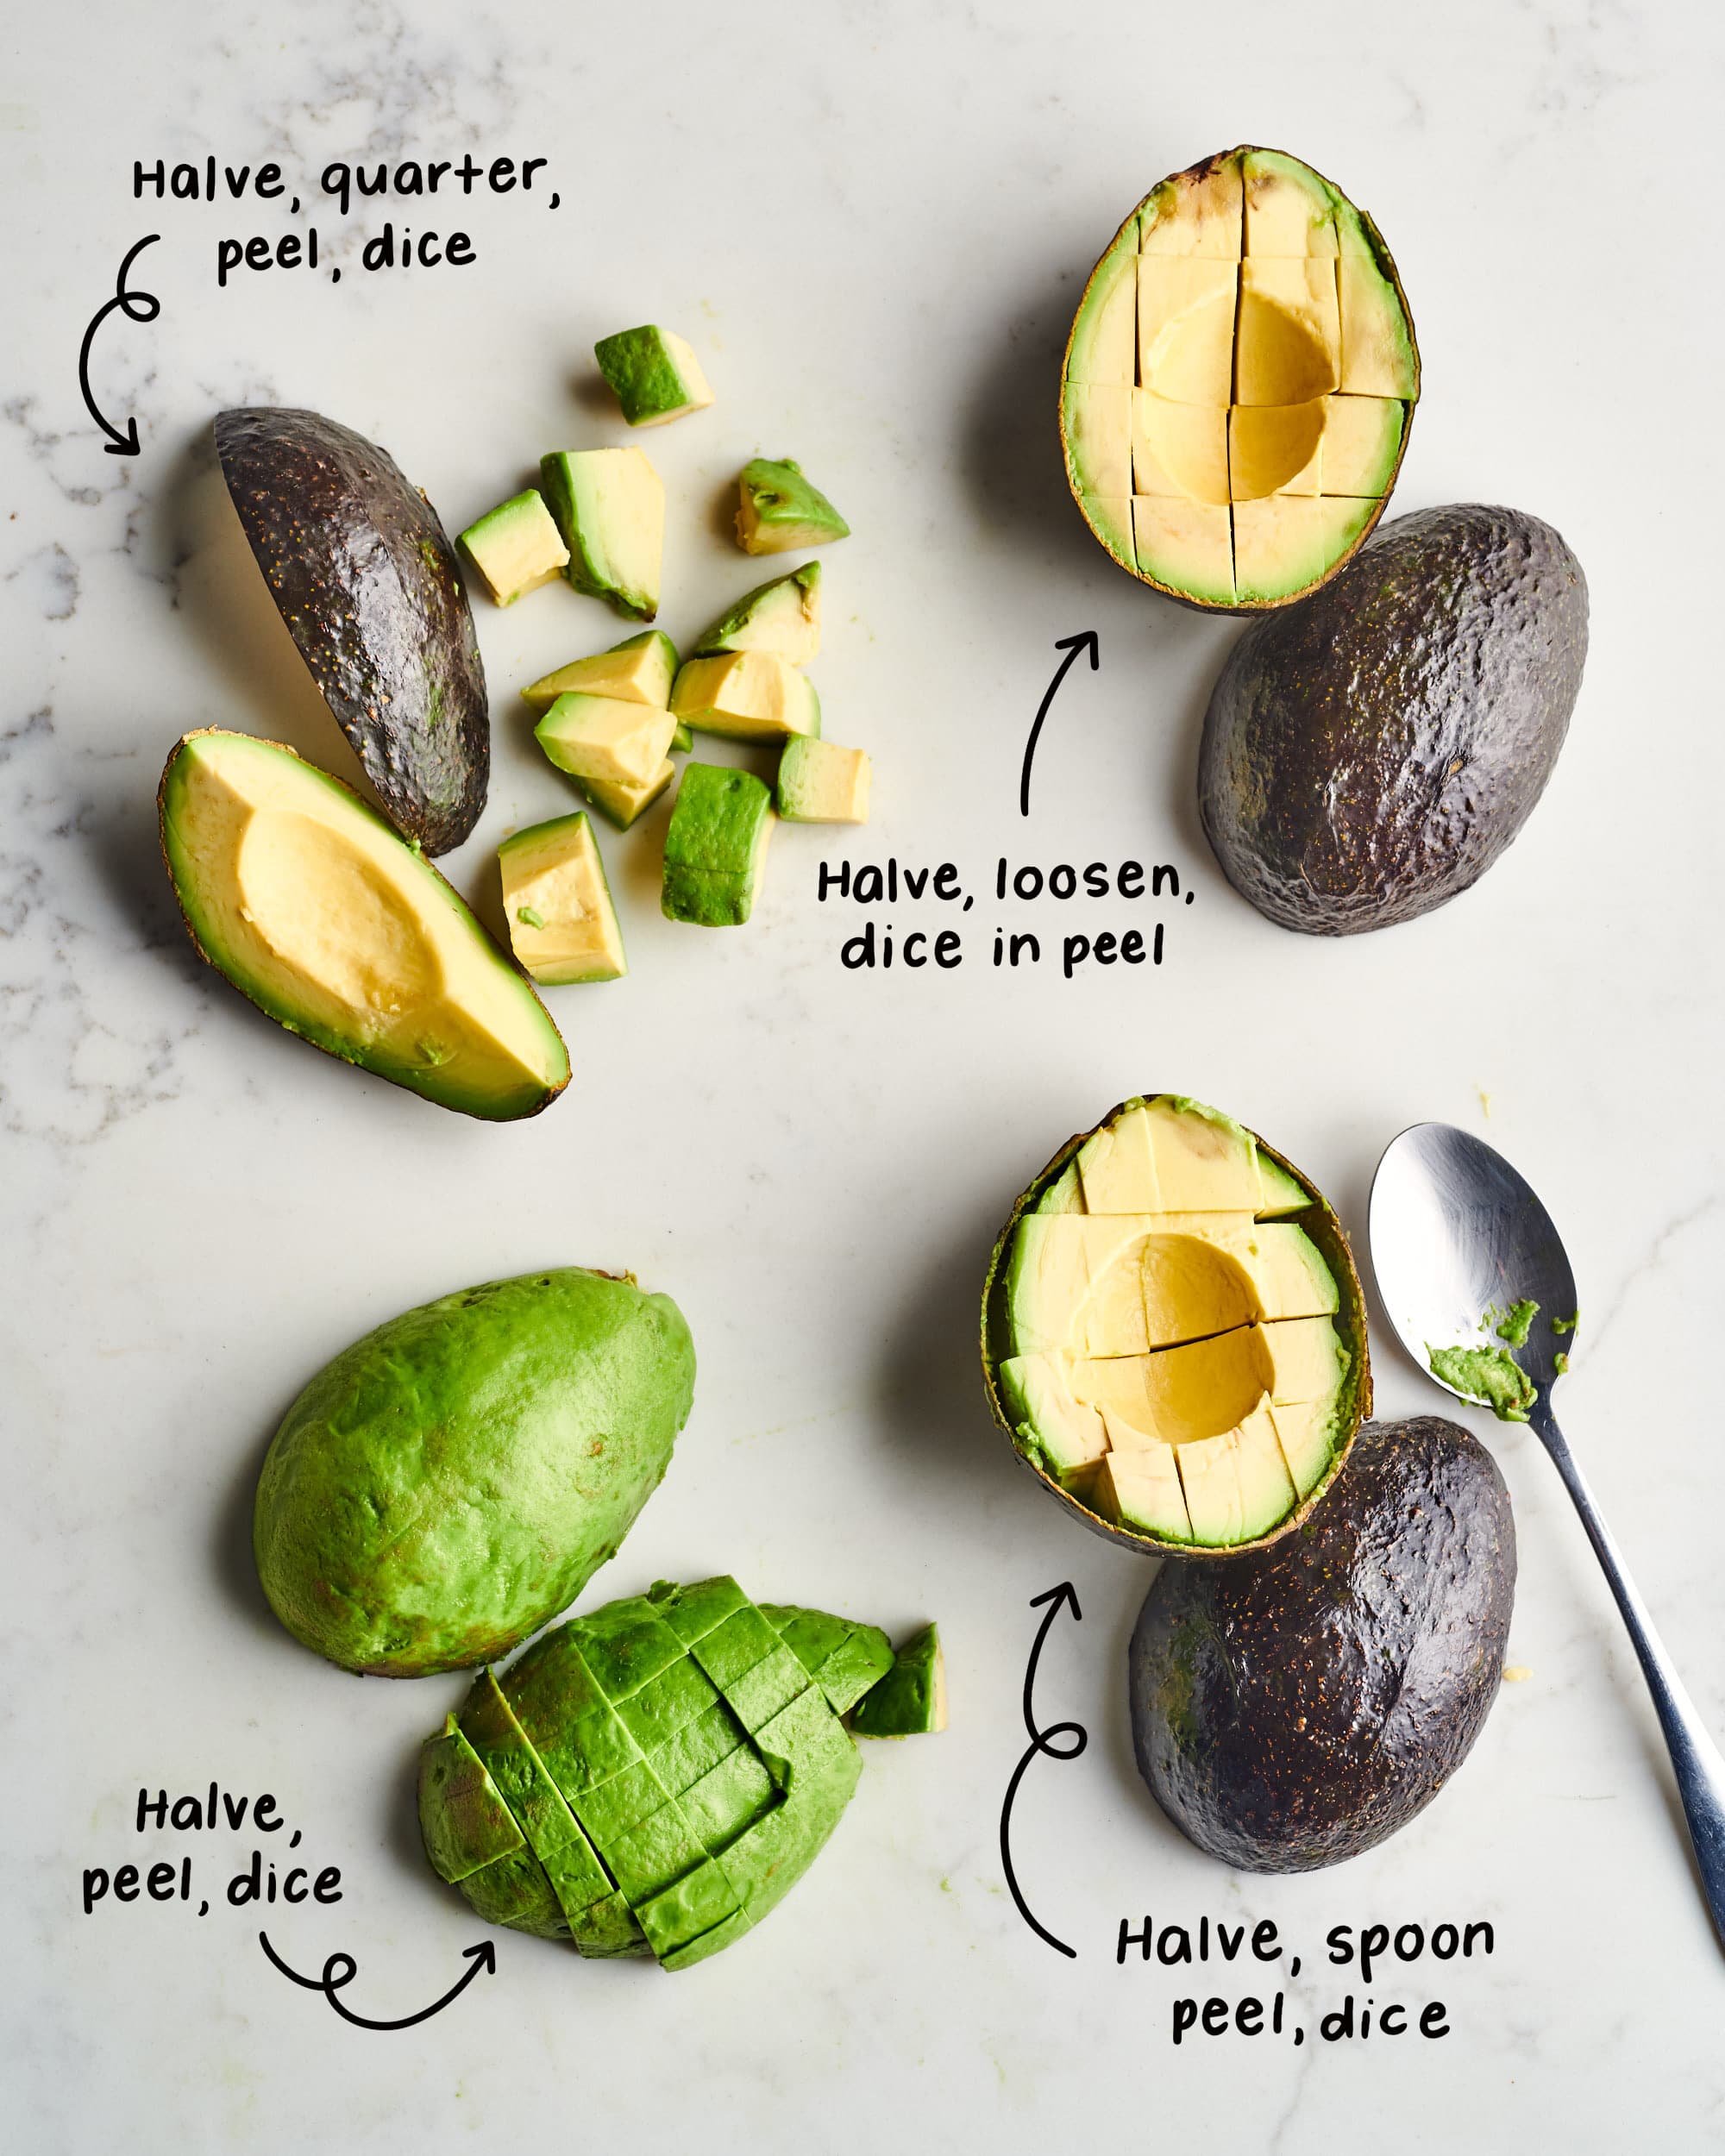 How to Cut an Avocado the Right Way